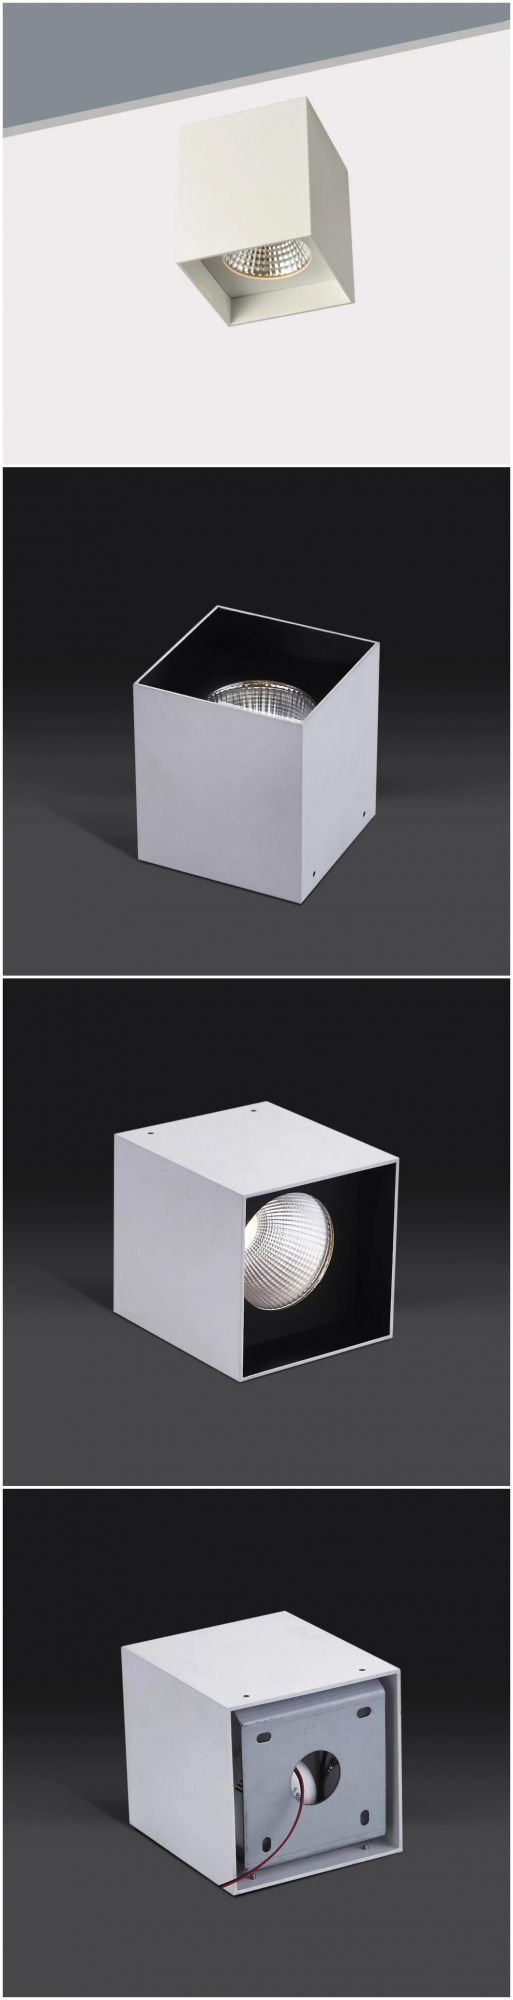 C6024 Cheap Square Spotlight Fixed CE Approval Downlight